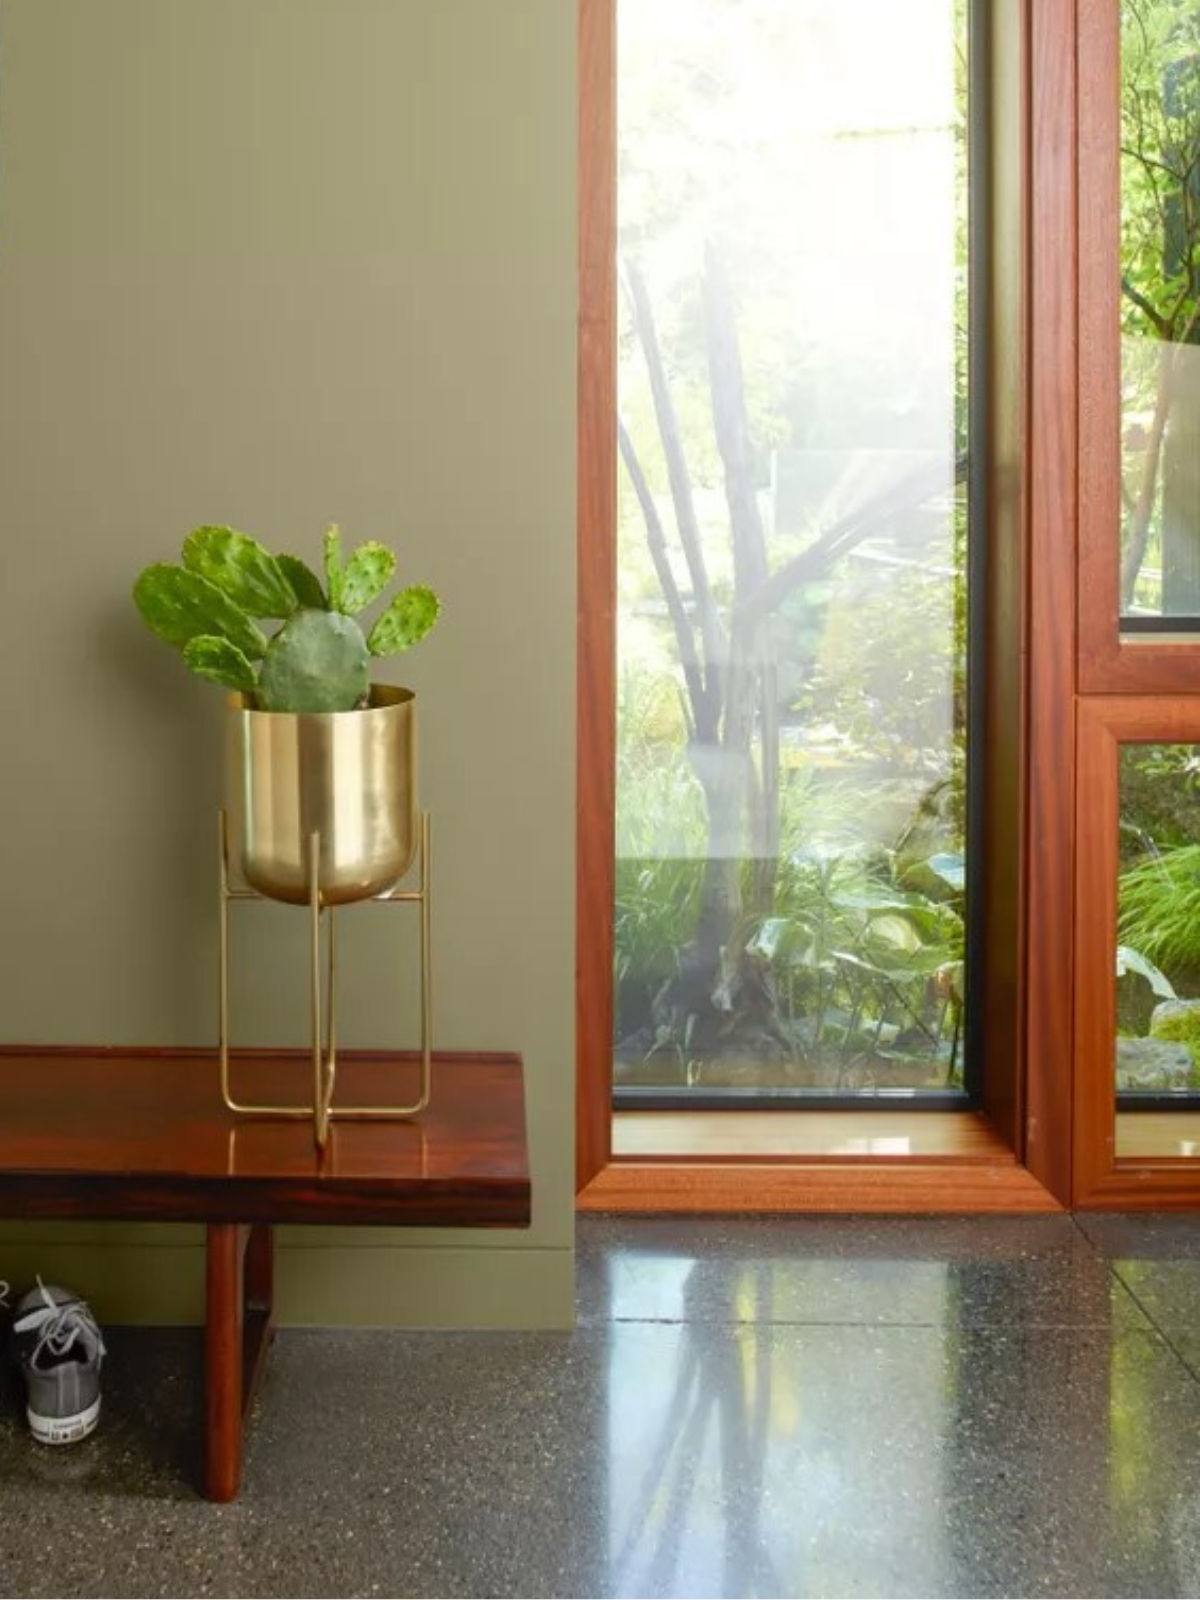 Hallway with green painted wall, wooden bench, and an indoor plant in metal planter